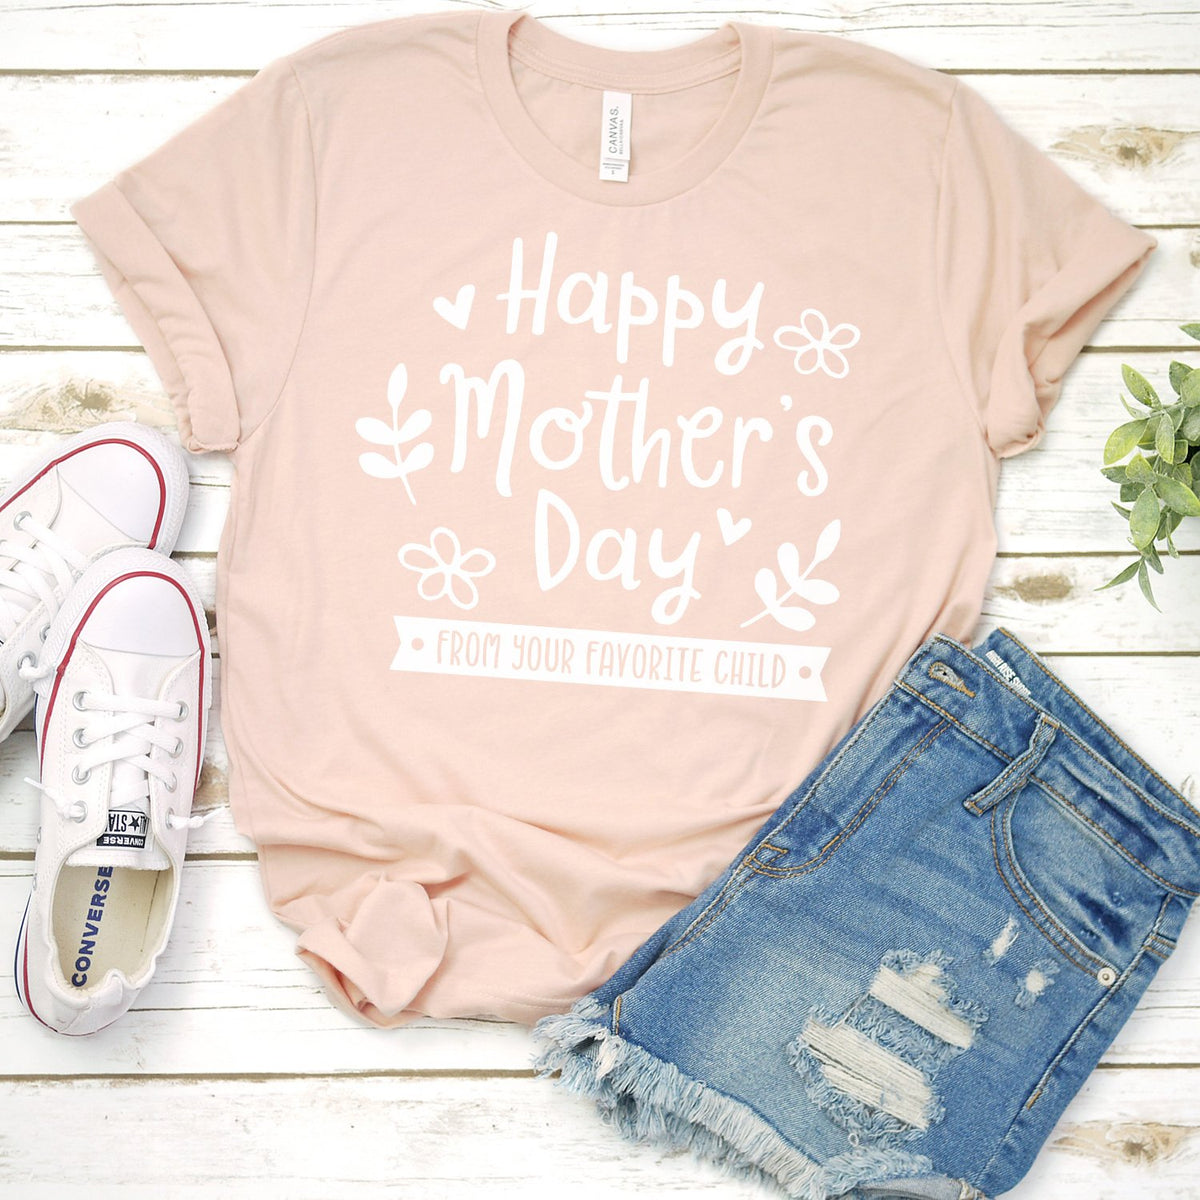 Happy Mother&#39;s Day From Your Favorite Child - Short Sleeve Tee Shirt